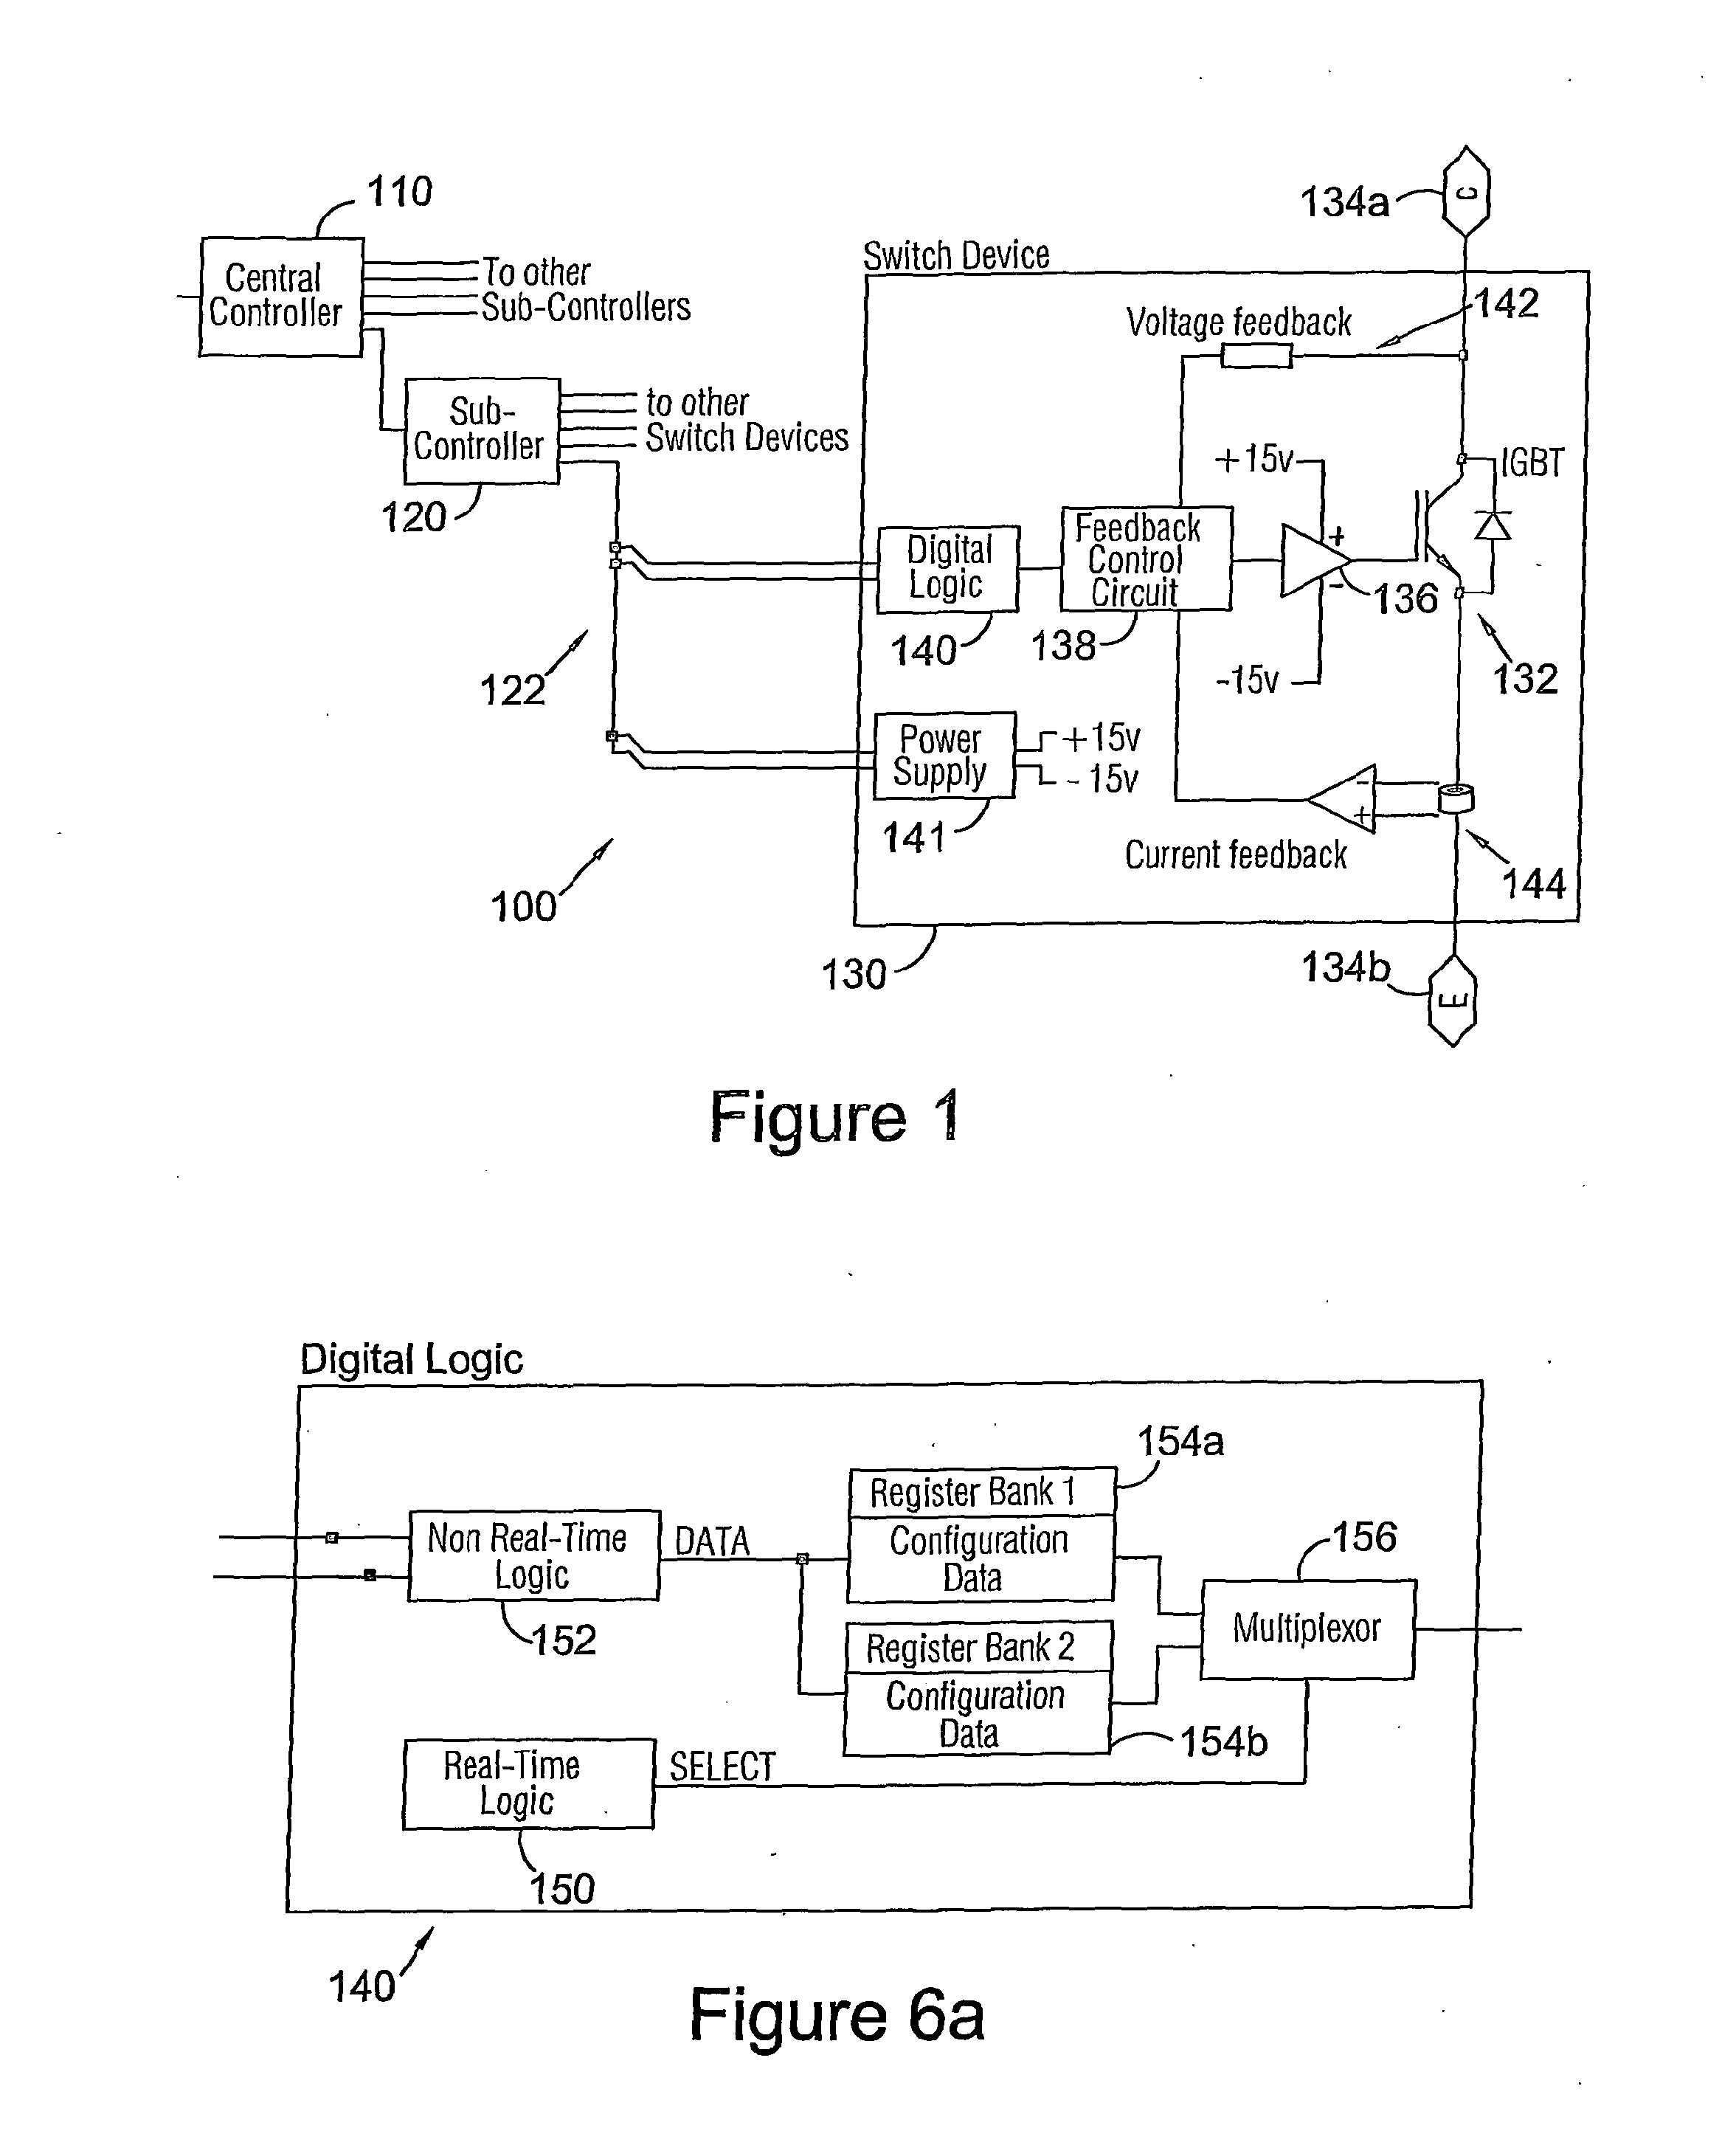 Fault-tolerant power semiconductor switching device control system